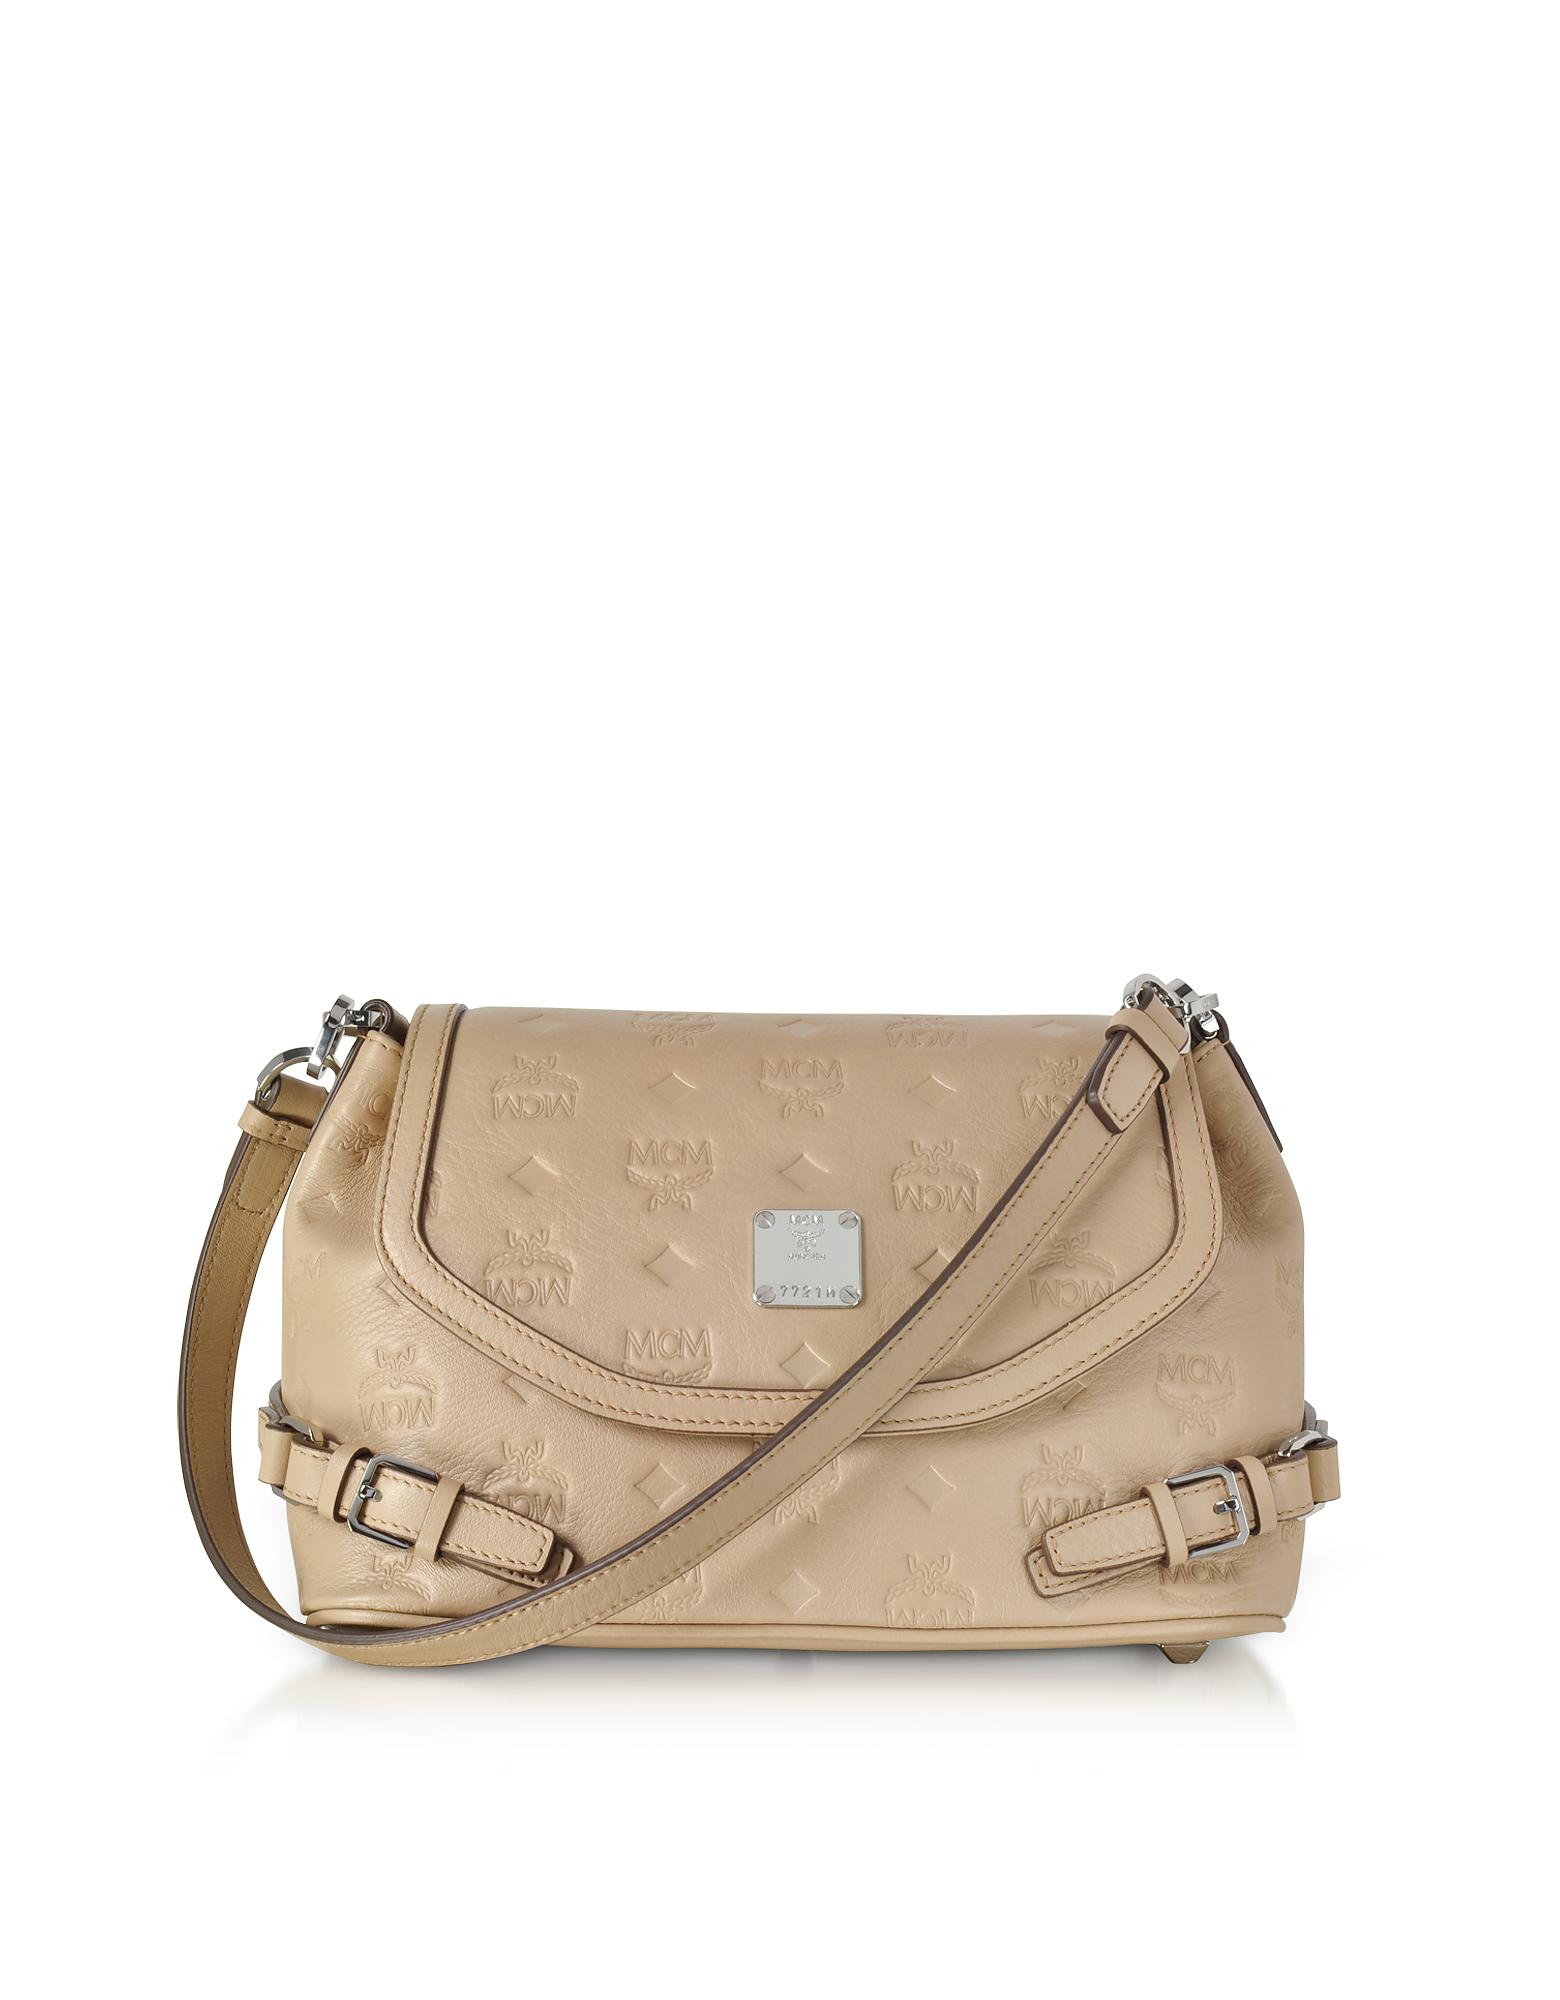 Lyst - Mcm Beige Signature Monogrammed Leather Small Crossbody Bag in Natural - Save 21 ...